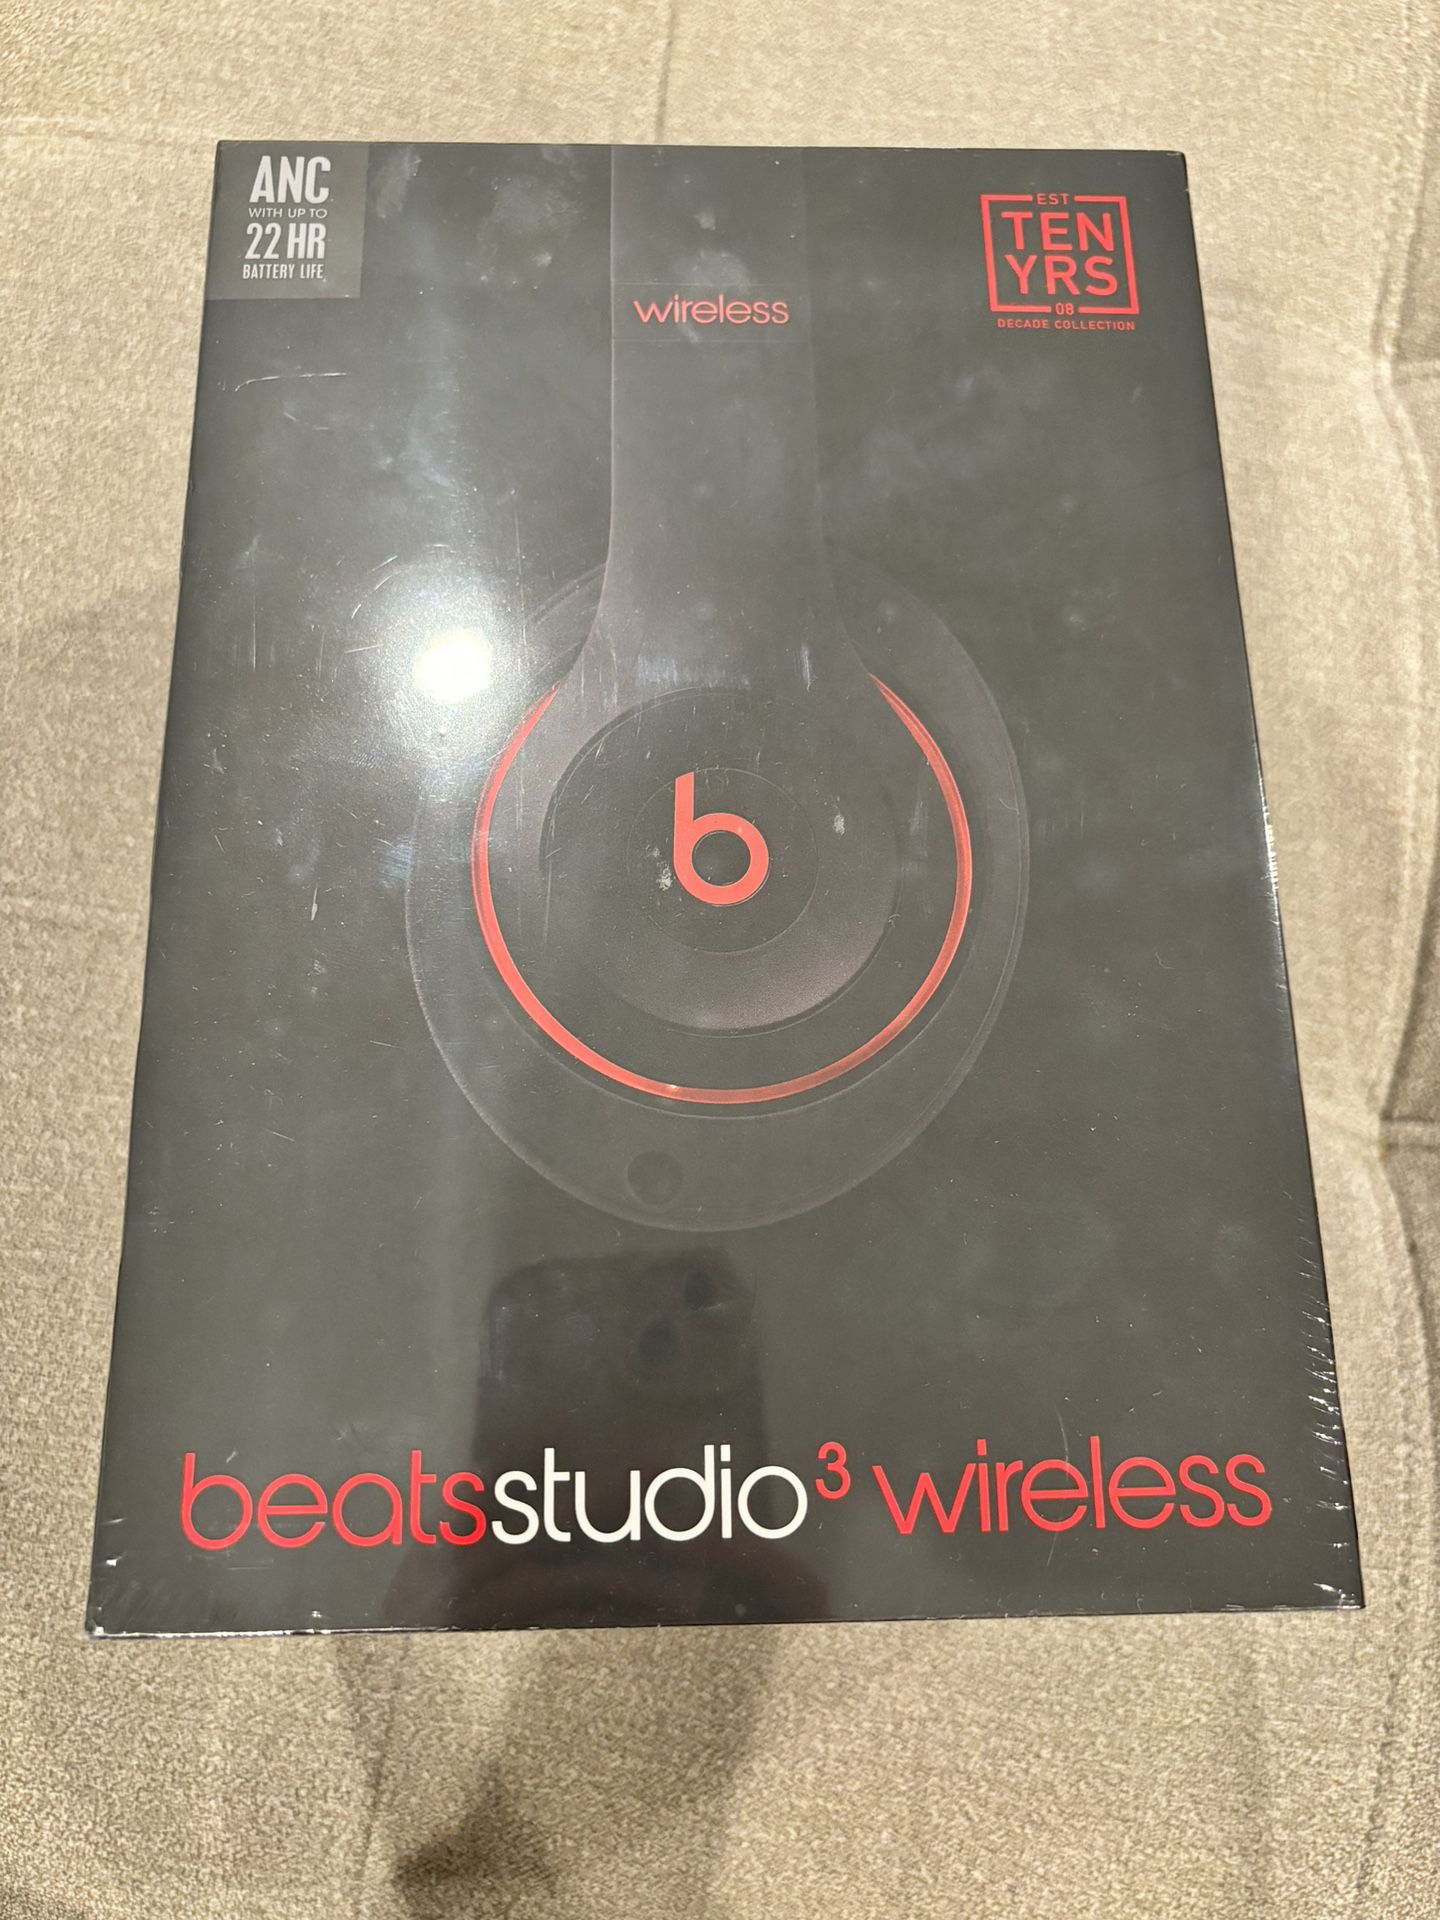 Beats Studio3 Wireless Noise Cancelling Over-Ear Headphones - Apple W1 Headphone Chip, Class 1 Bluetooth, 22 Hours of Listening Time, Built-in Microph